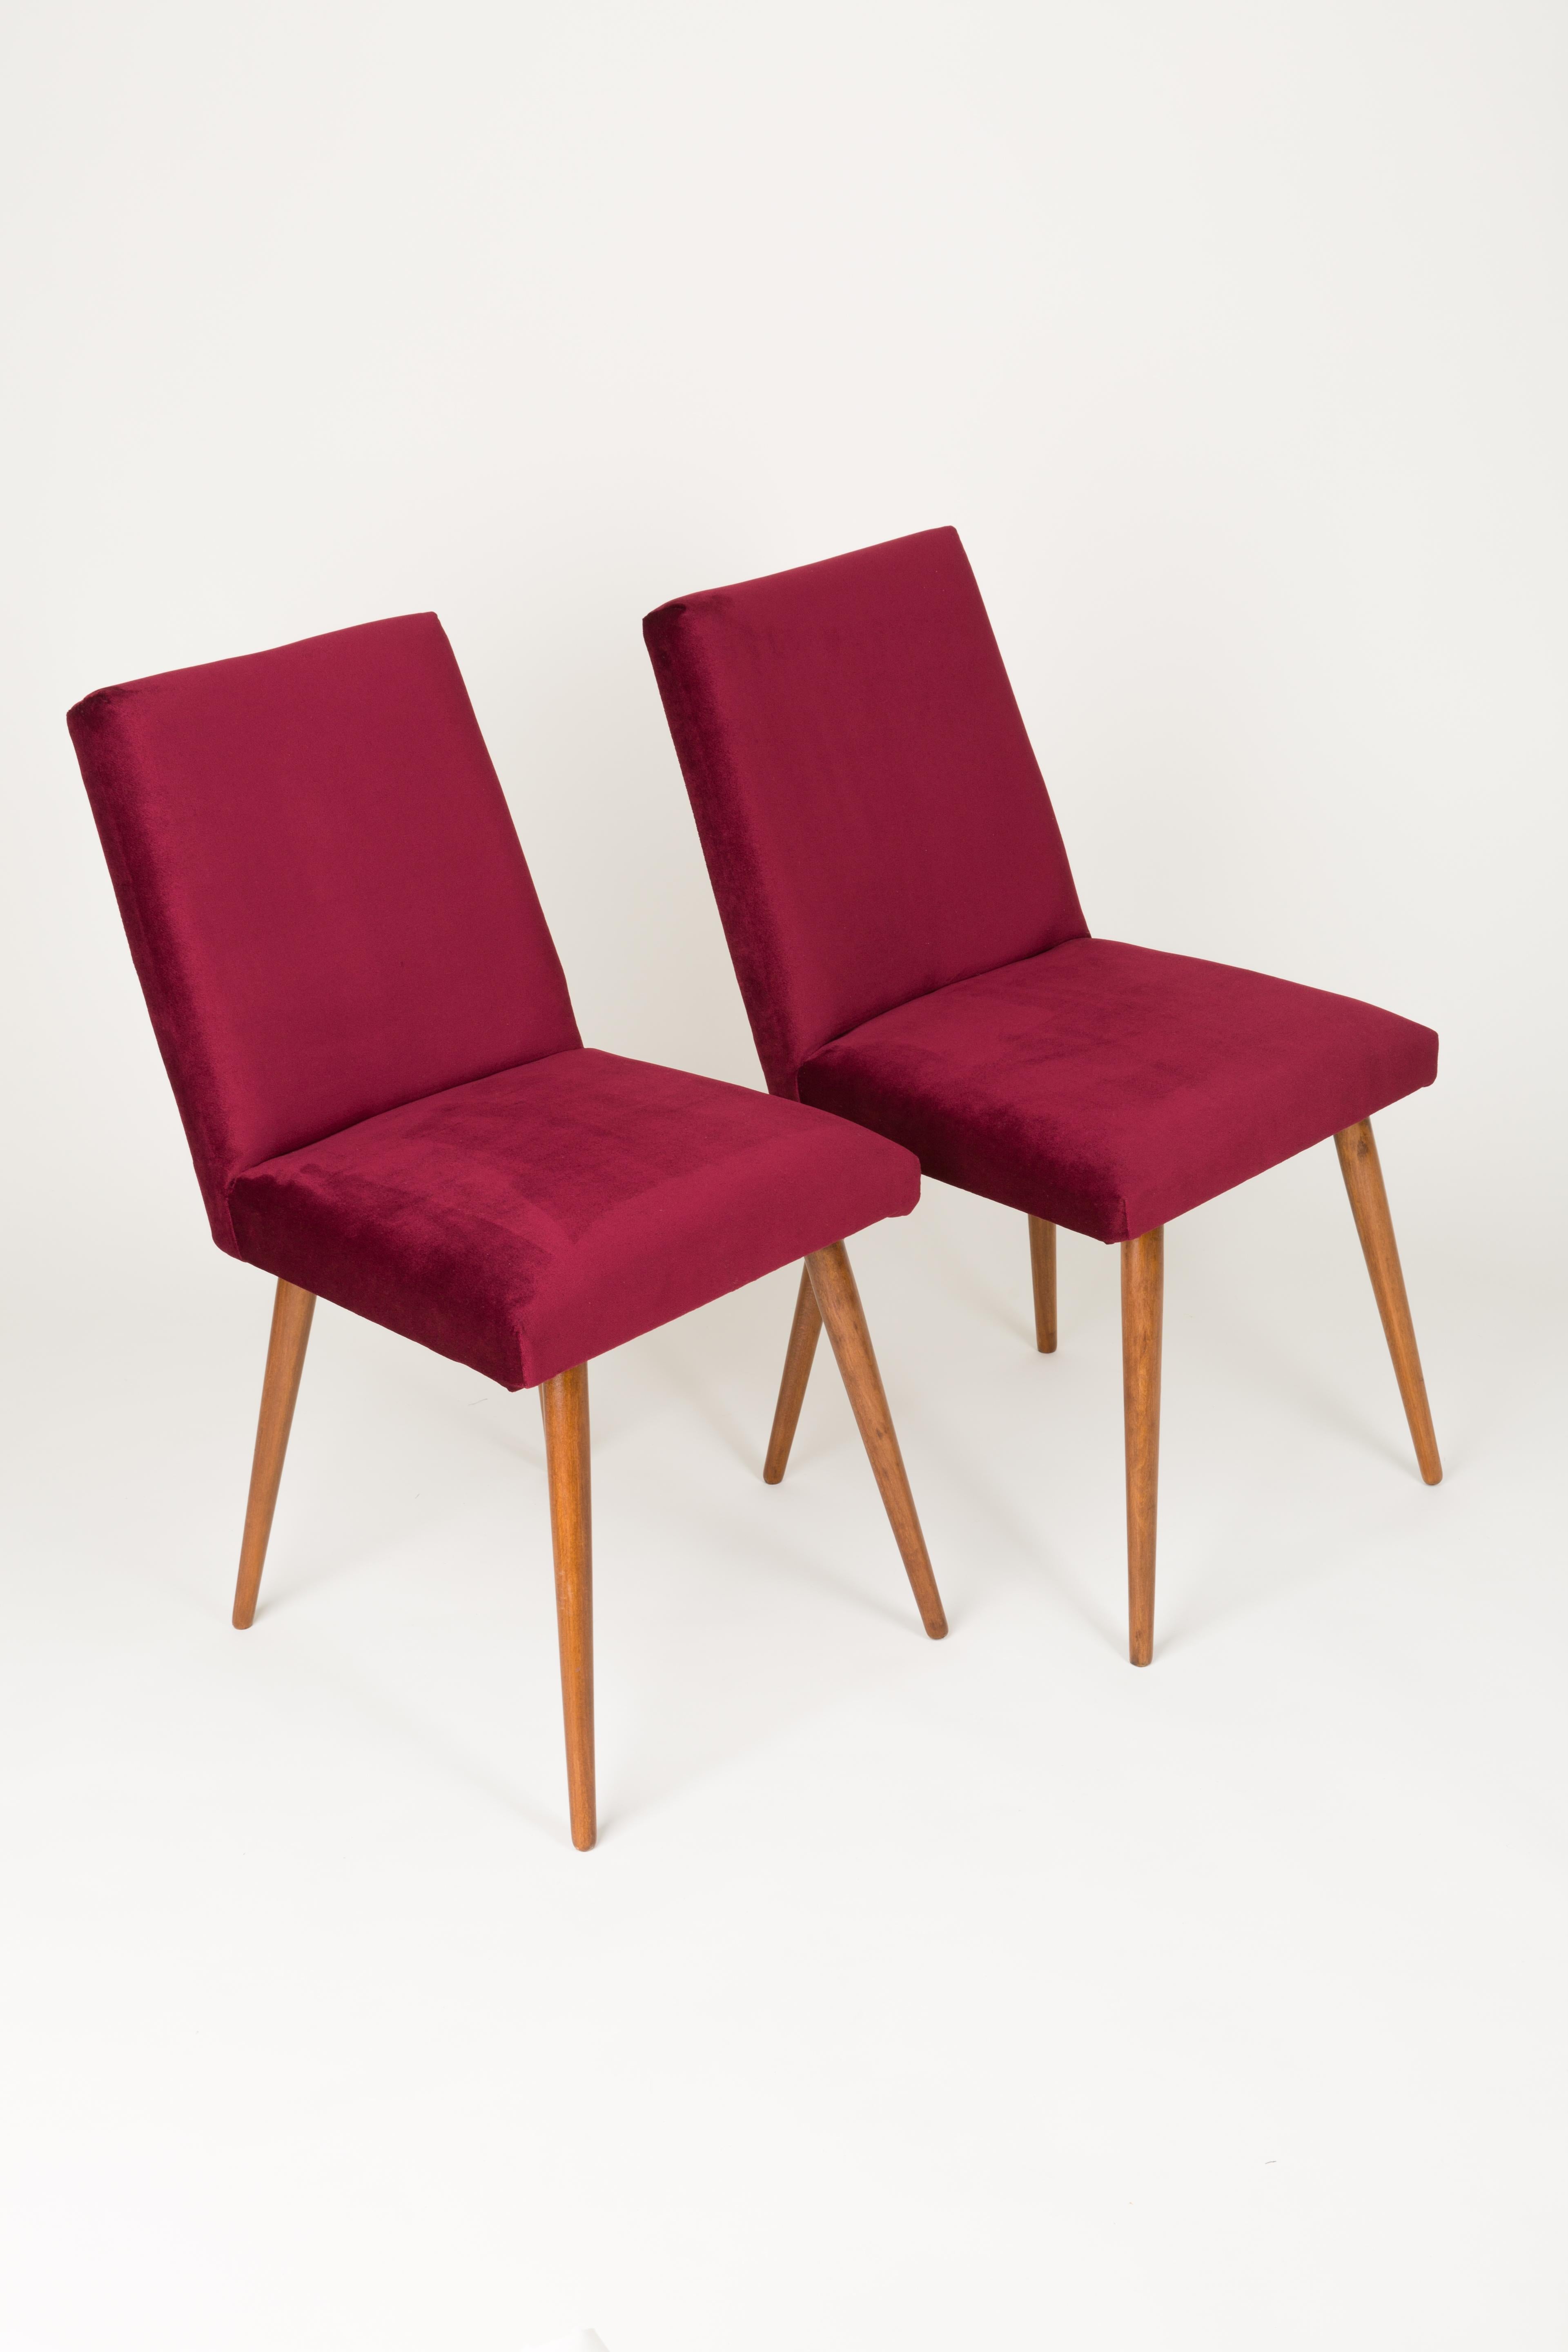 Set of Four 20th Century Dark Green and Burgundy Velvet Chairs, 1960s For Sale 2